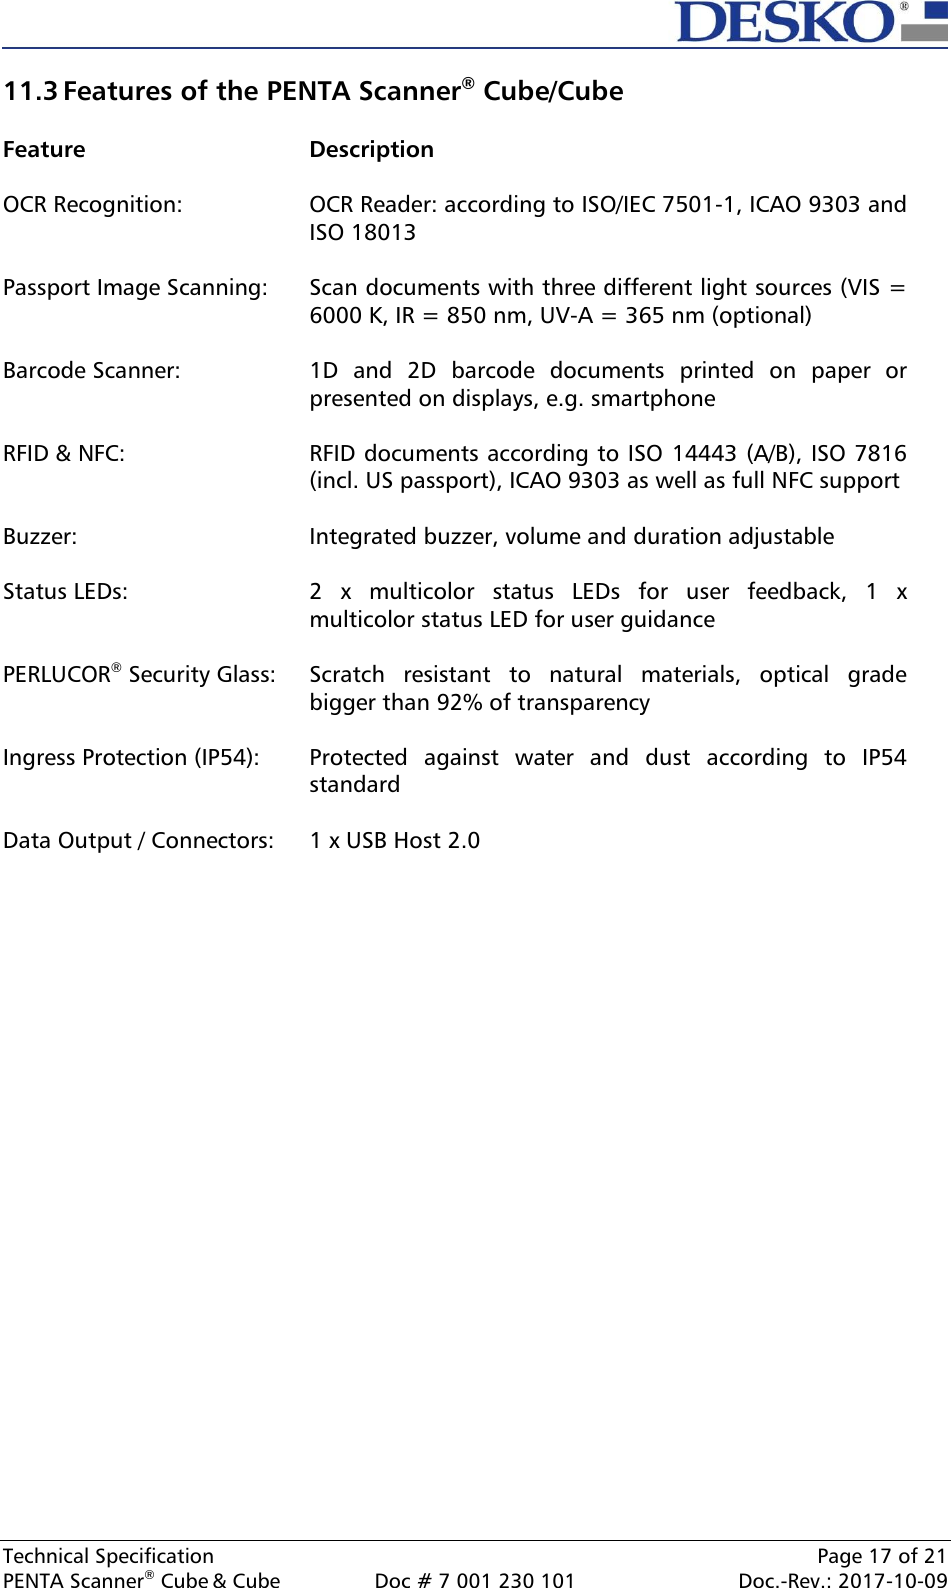  Technical Specification    Page 17 of 21 PENTA Scanner® Cube &amp; Cube  Doc # 7 001 230 101  Doc.-Rev.: 2017-10-09    11.3 Features of the PENTA Scanner® Cube/Cube  Feature  Description OCR Recognition: OCR Reader: according to ISO/IEC 7501-1, ICAO 9303 and ISO 18013  Passport Image Scanning: Scan documents with three different light sources (VIS = 6000 K, IR = 850 nm, UV-A = 365 nm (optional)  Barcode Scanner: 1D  and  2D  barcode  documents  printed  on  paper  or presented on displays, e.g. smartphone  RFID &amp; NFC: RFID documents according to ISO 14443 (A/B), ISO 7816 (incl. US passport), ICAO 9303 as well as full NFC support  Buzzer: Integrated buzzer, volume and duration adjustable  Status LEDs: 2  x  multicolor  status  LEDs  for  user  feedback,  1  x multicolor status LED for user guidance  PERLUCOR® Security Glass: Scratch  resistant  to  natural  materials,  optical  grade bigger than 92% of transparency  Ingress Protection (IP54): Protected  against  water  and  dust  according  to  IP54 standard  Data Output / Connectors: 1 x USB Host 2.0     